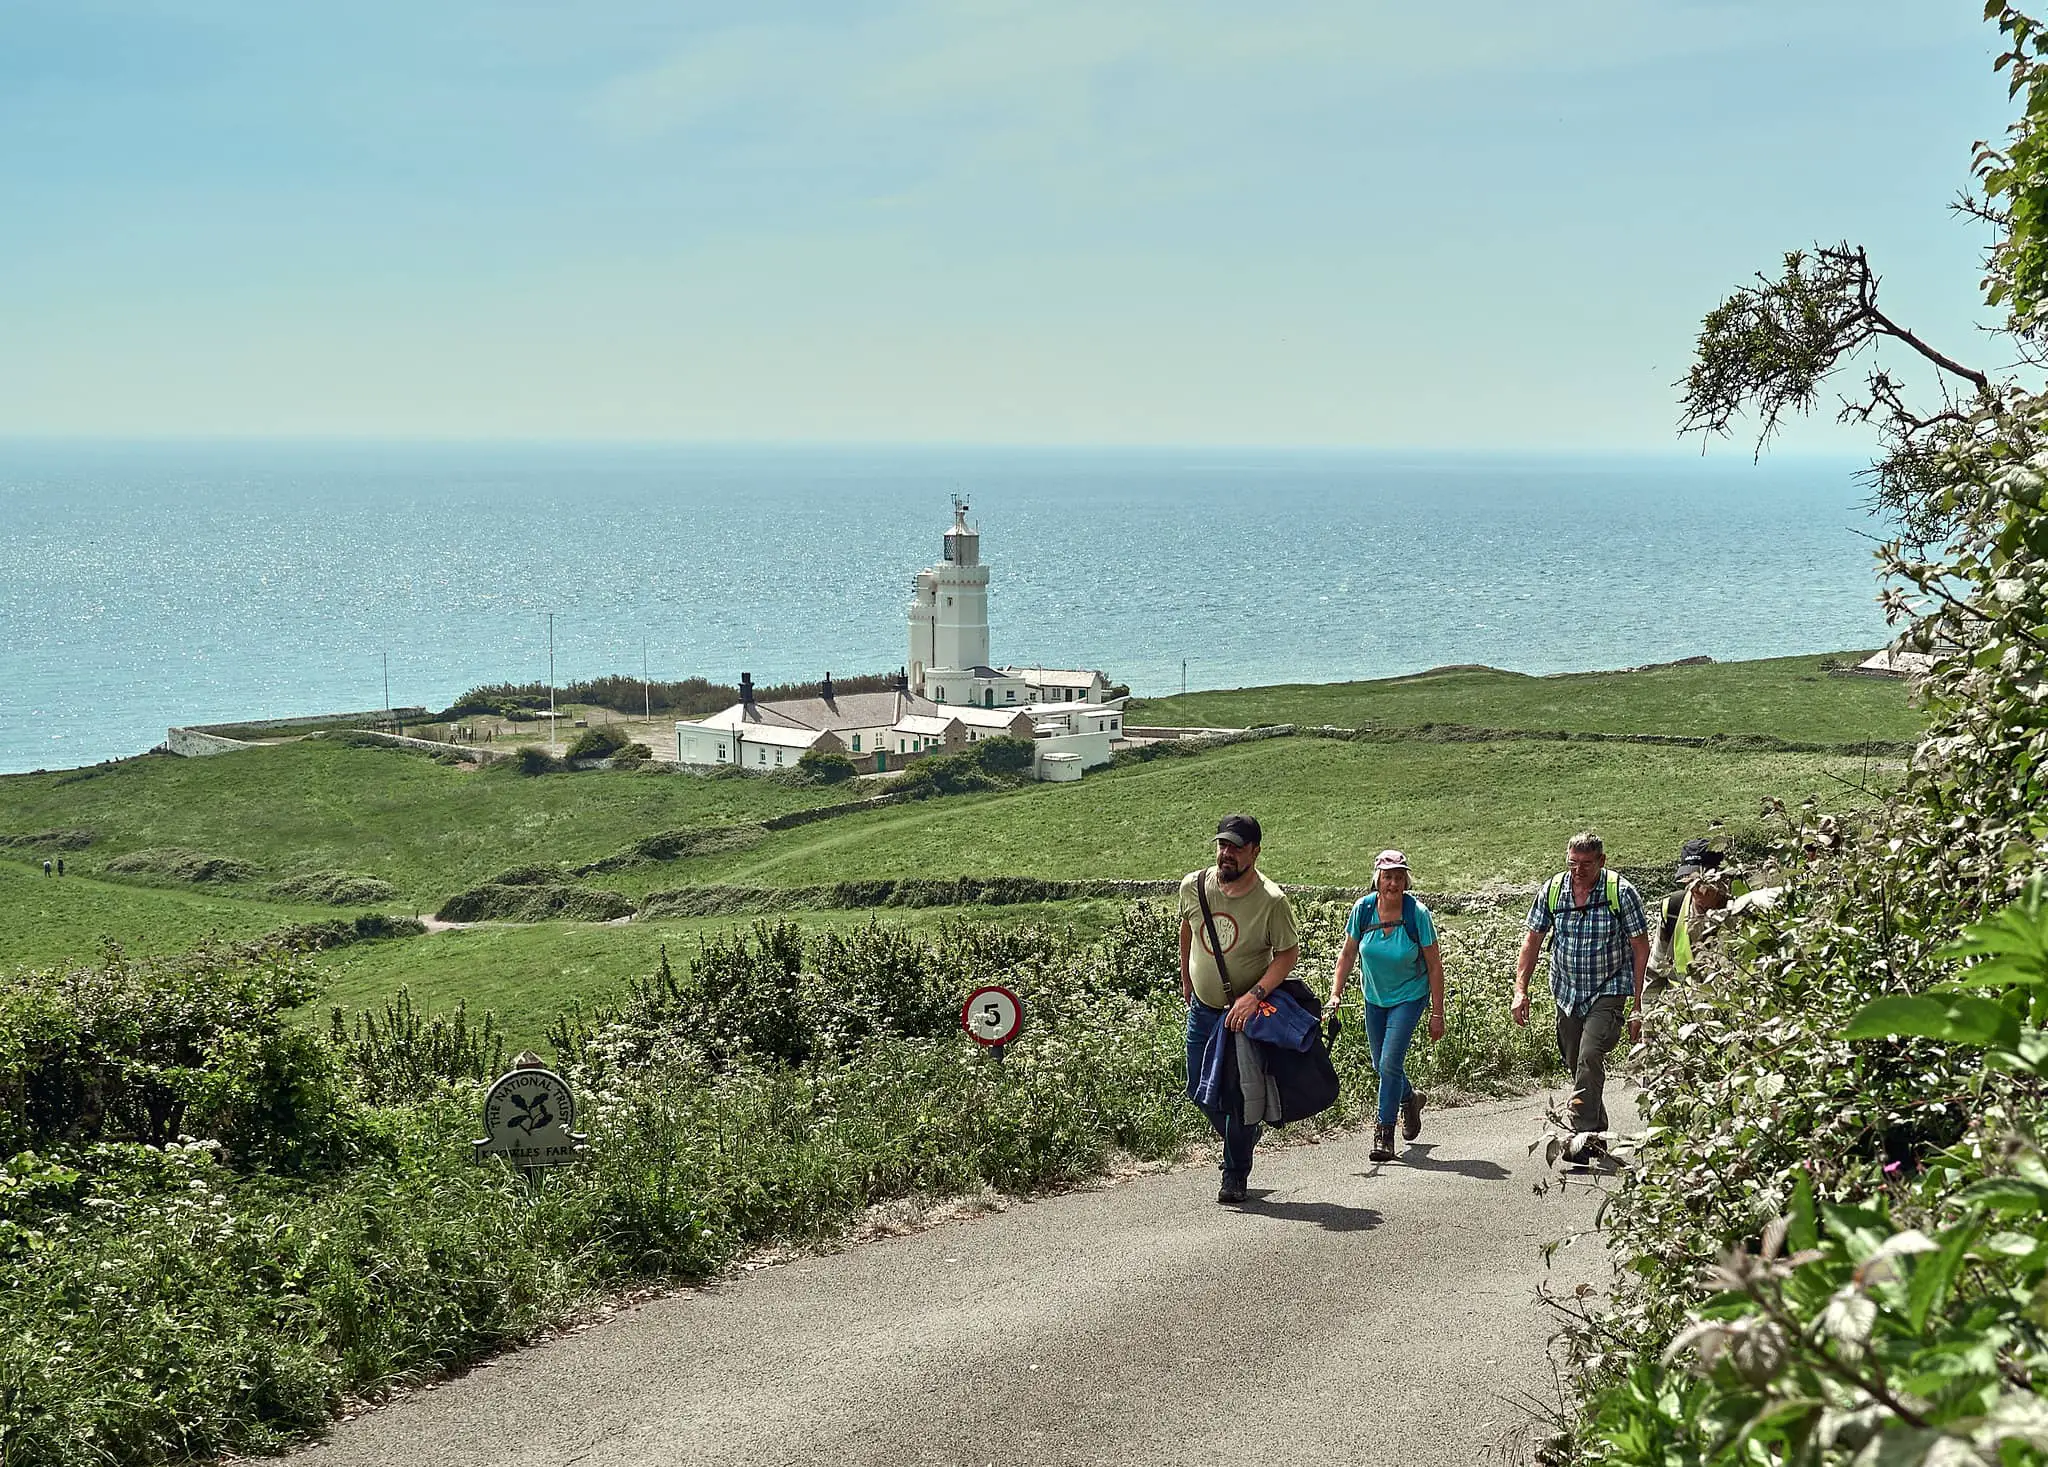 Walkers on the road from St Catherine's Lighthouse - Visit Isle of Wight